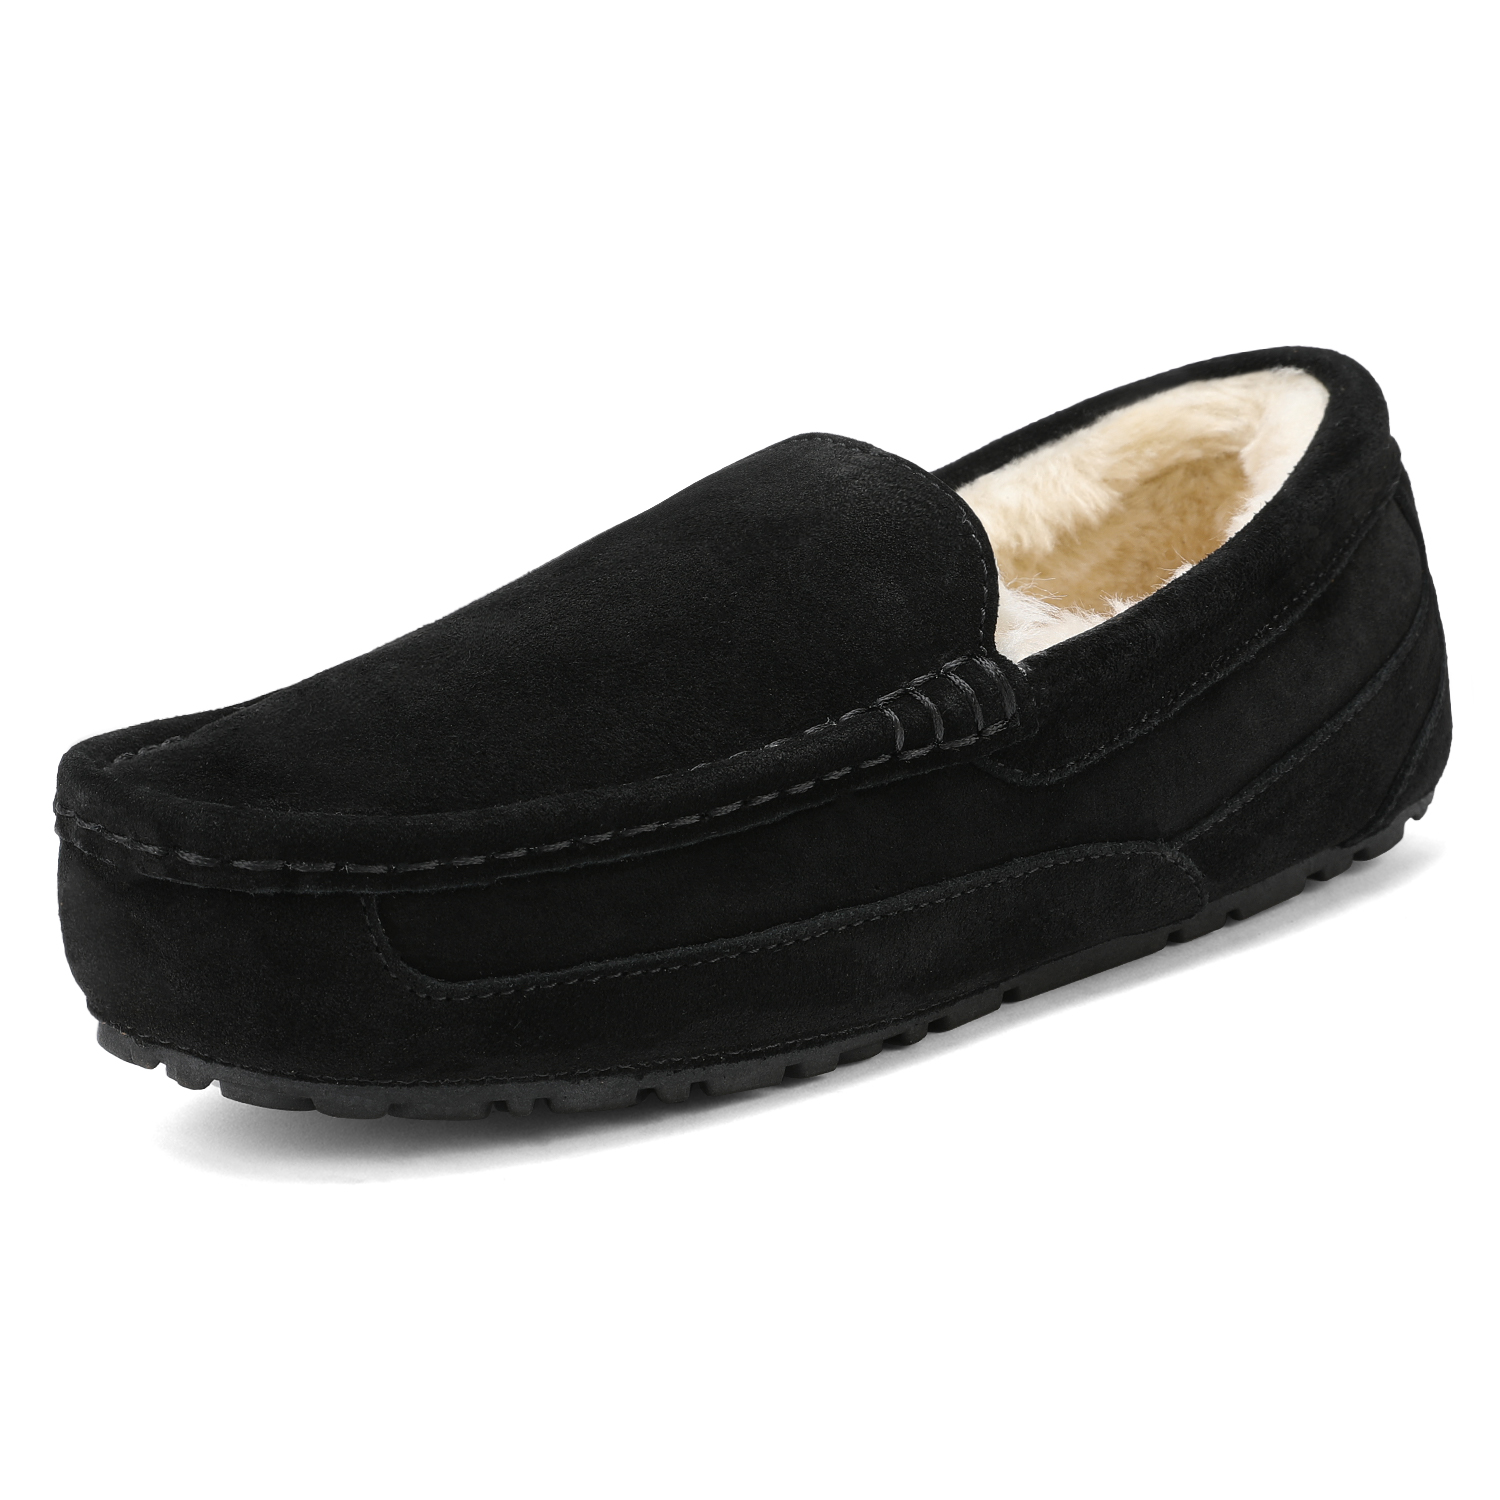 Dream Pairs New Soft Mens Au-Loafer Indoor Warm Moccasins Slippers Flats Shoes Au-Loafer-01 Black Size 7 - image 1 of 5